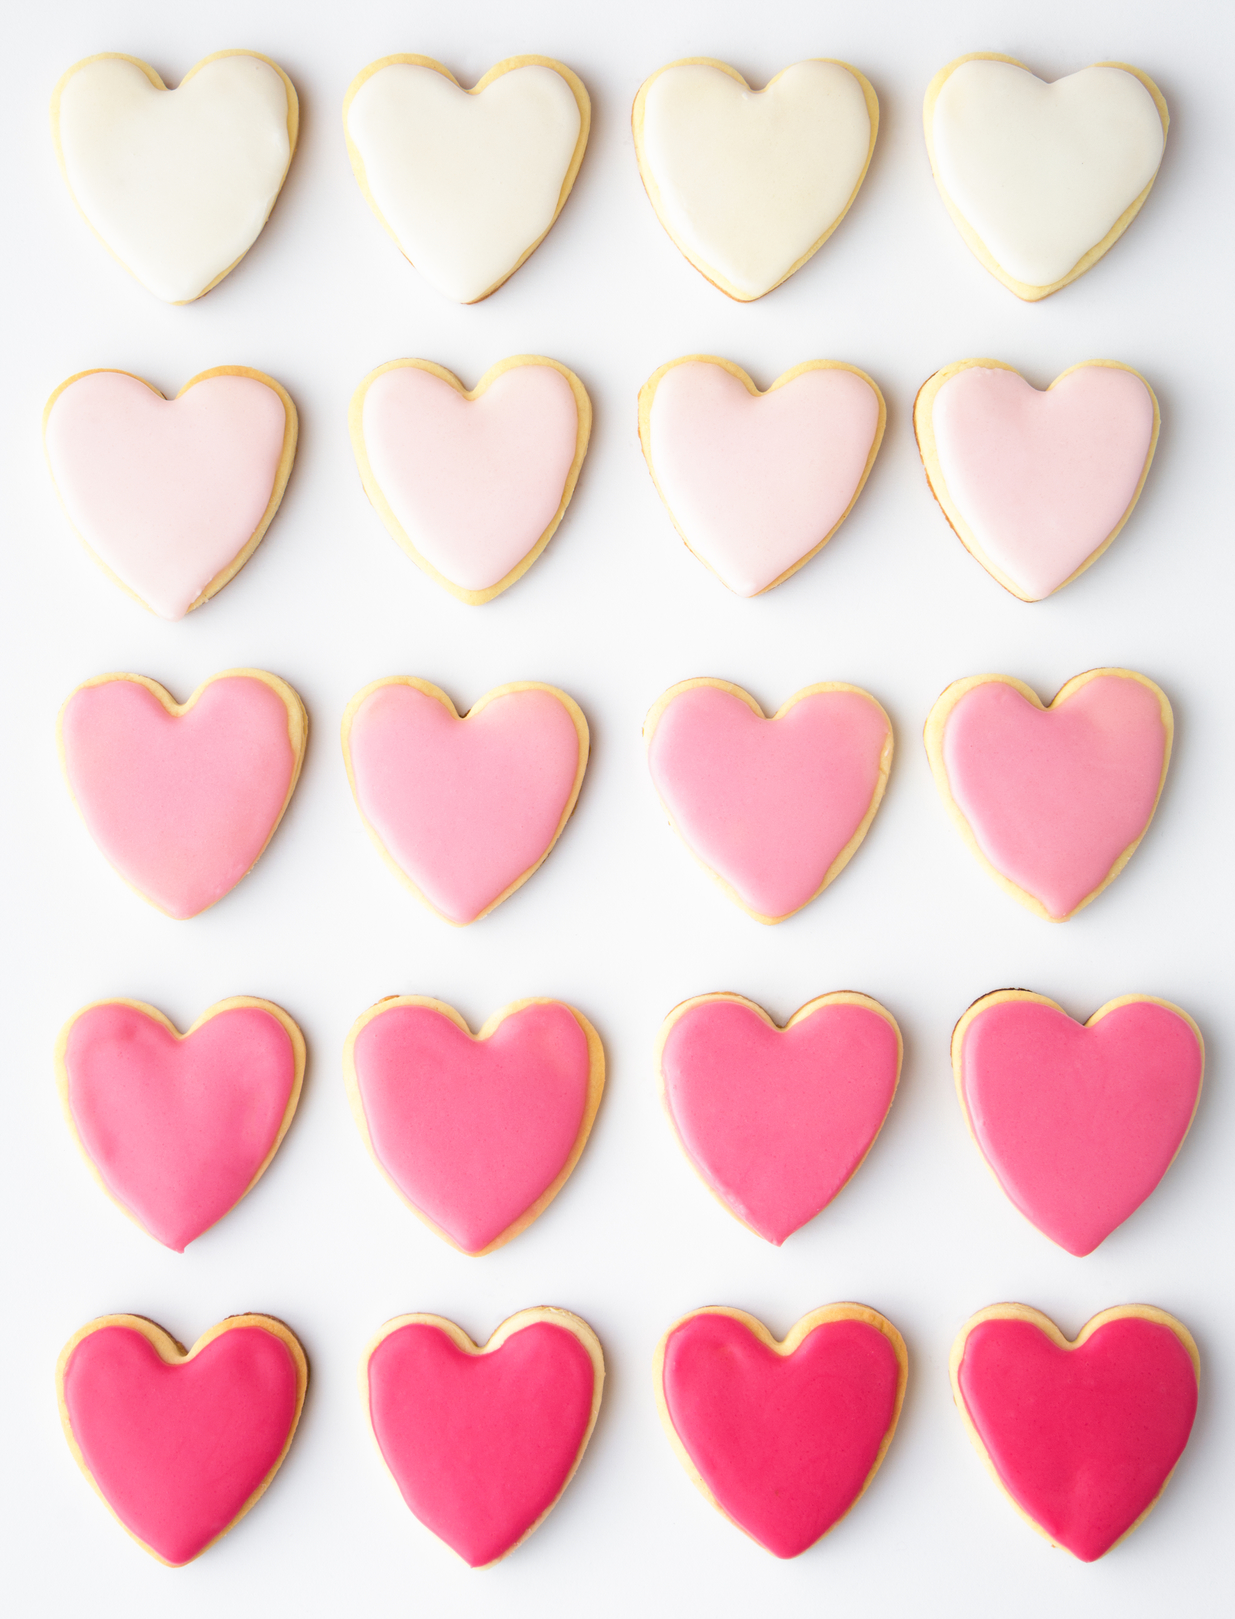 Valentine's Day Heart Shaped Sugar Cookies Recipe